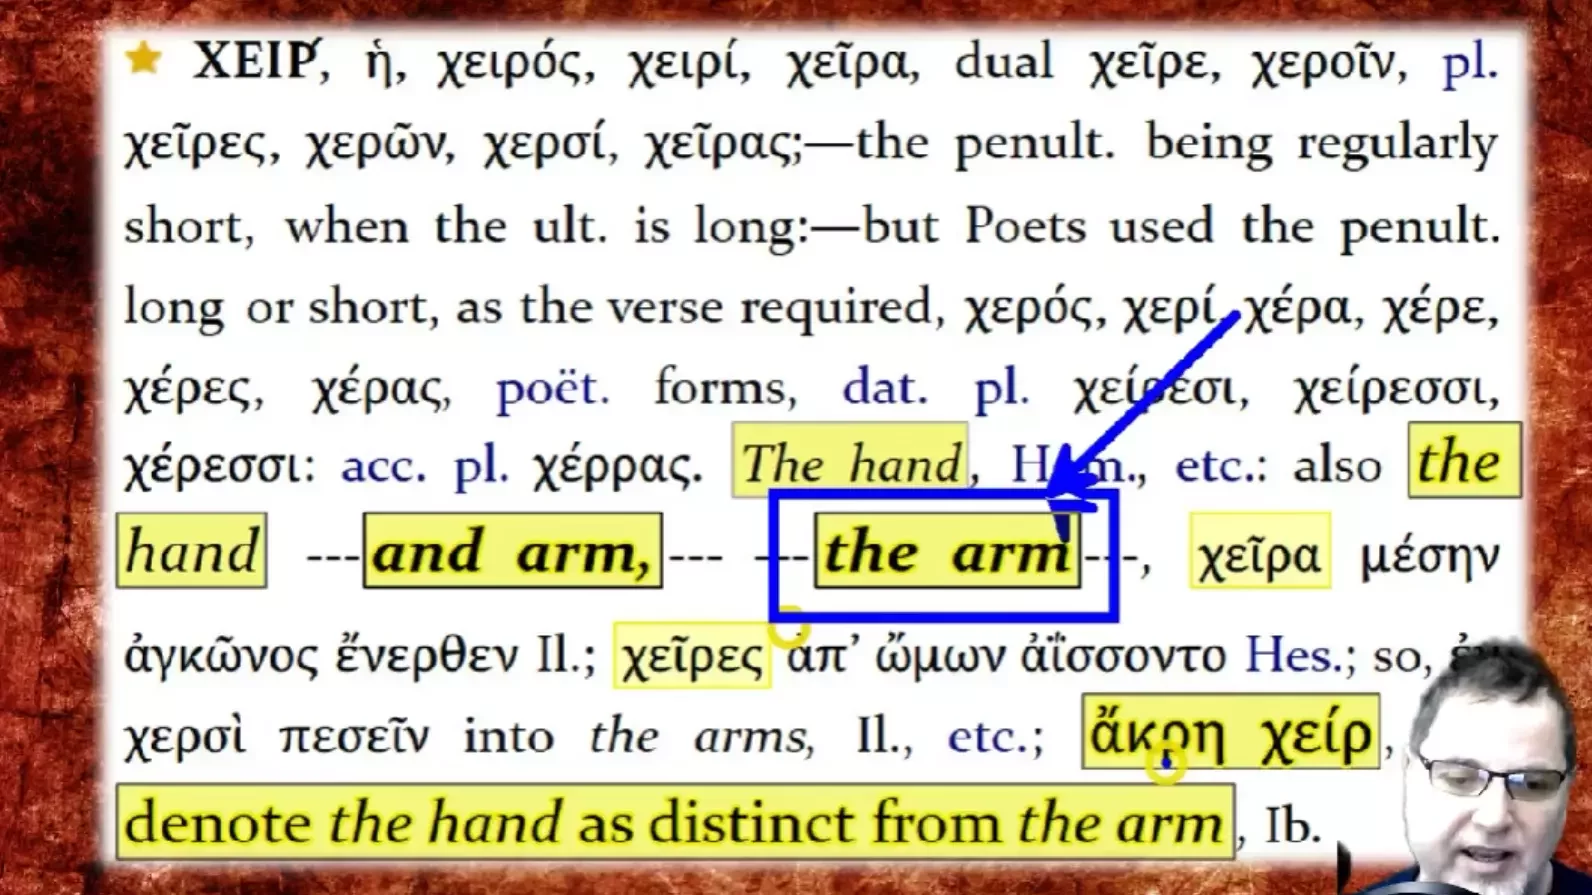 HAND MEANS ARM IN REVELATION IN THE BIBLE